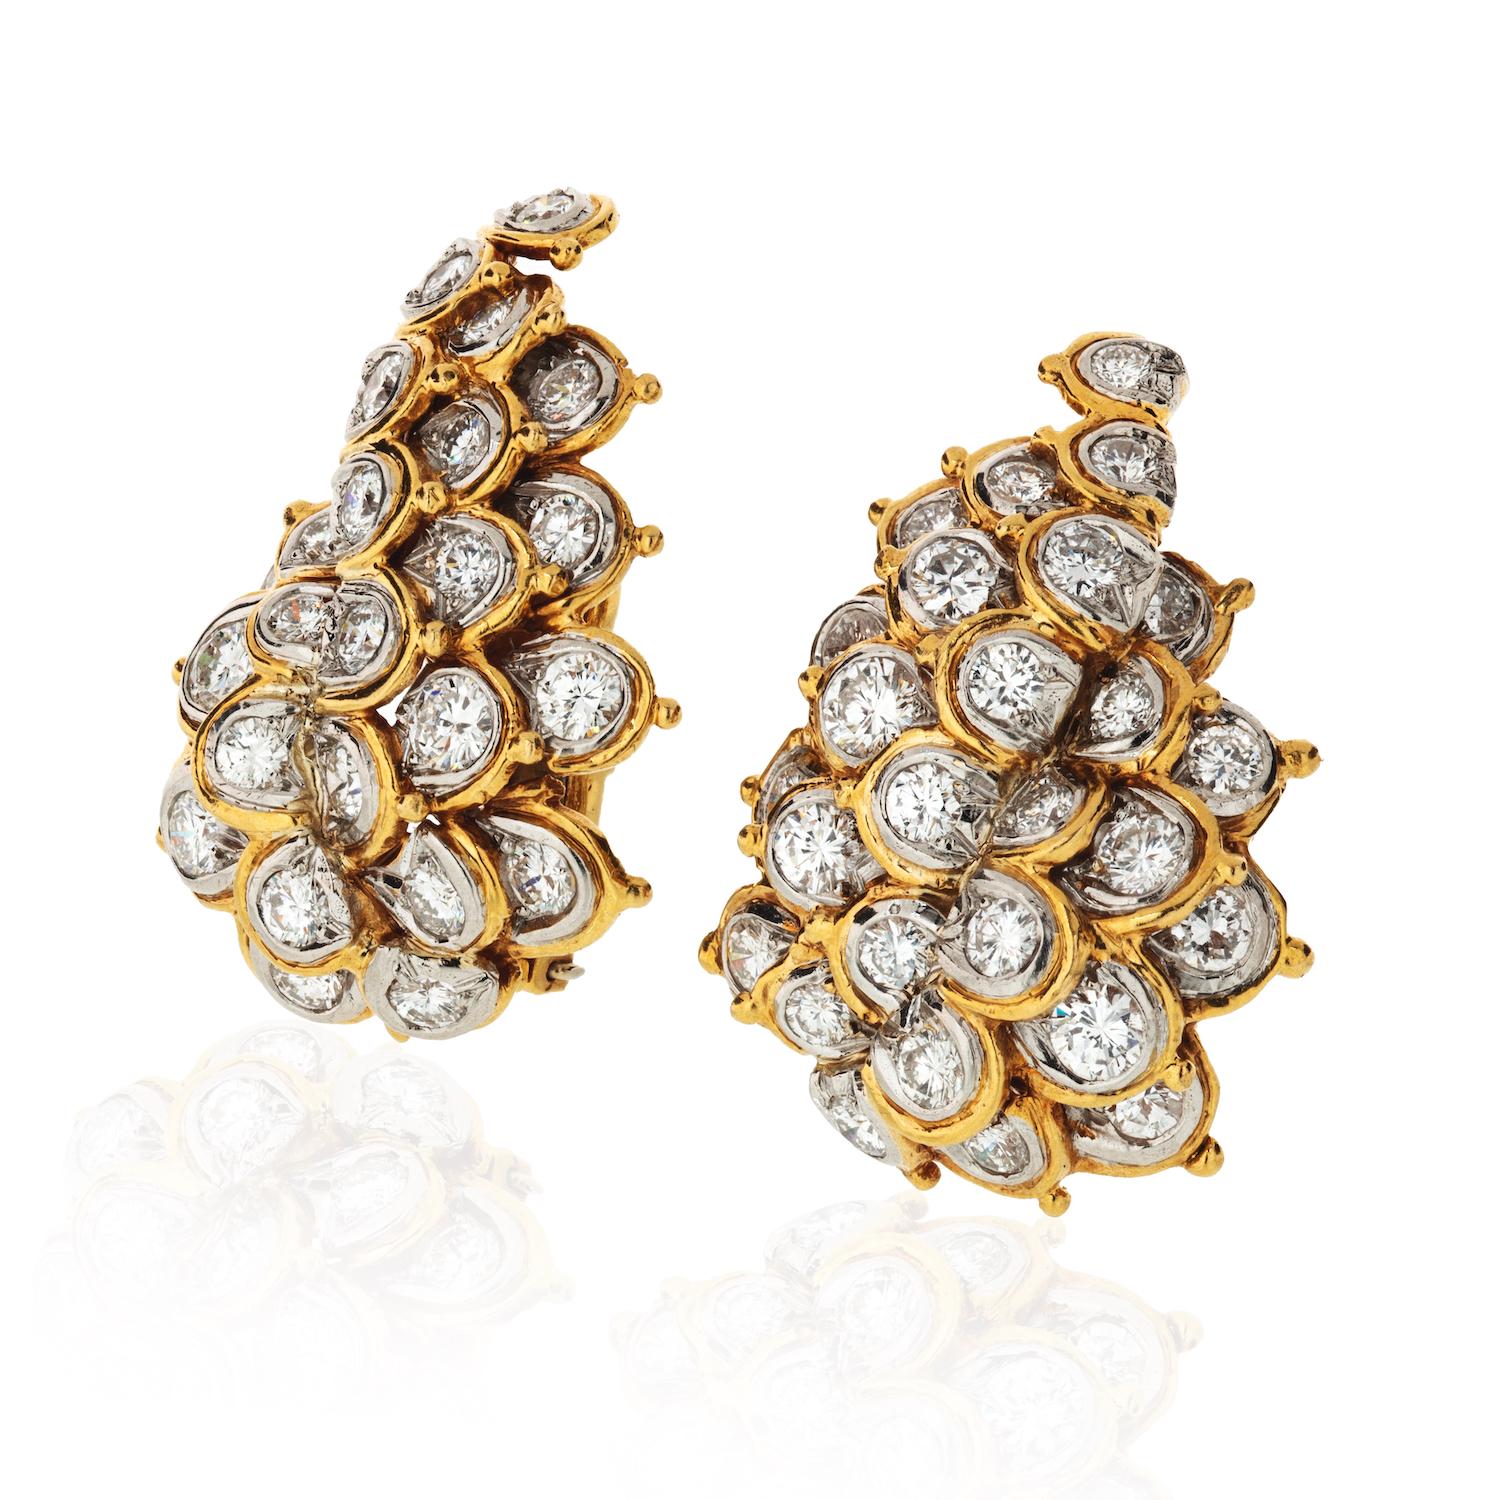 Yellow gold leaf motif style estate diamond earrings crafted in Platinum and 18K yellow gold. Encrusted with about 5.00 carats of round brilliant cuts.

These earrings have a clip back closure and are slightly over 1 inch in length.